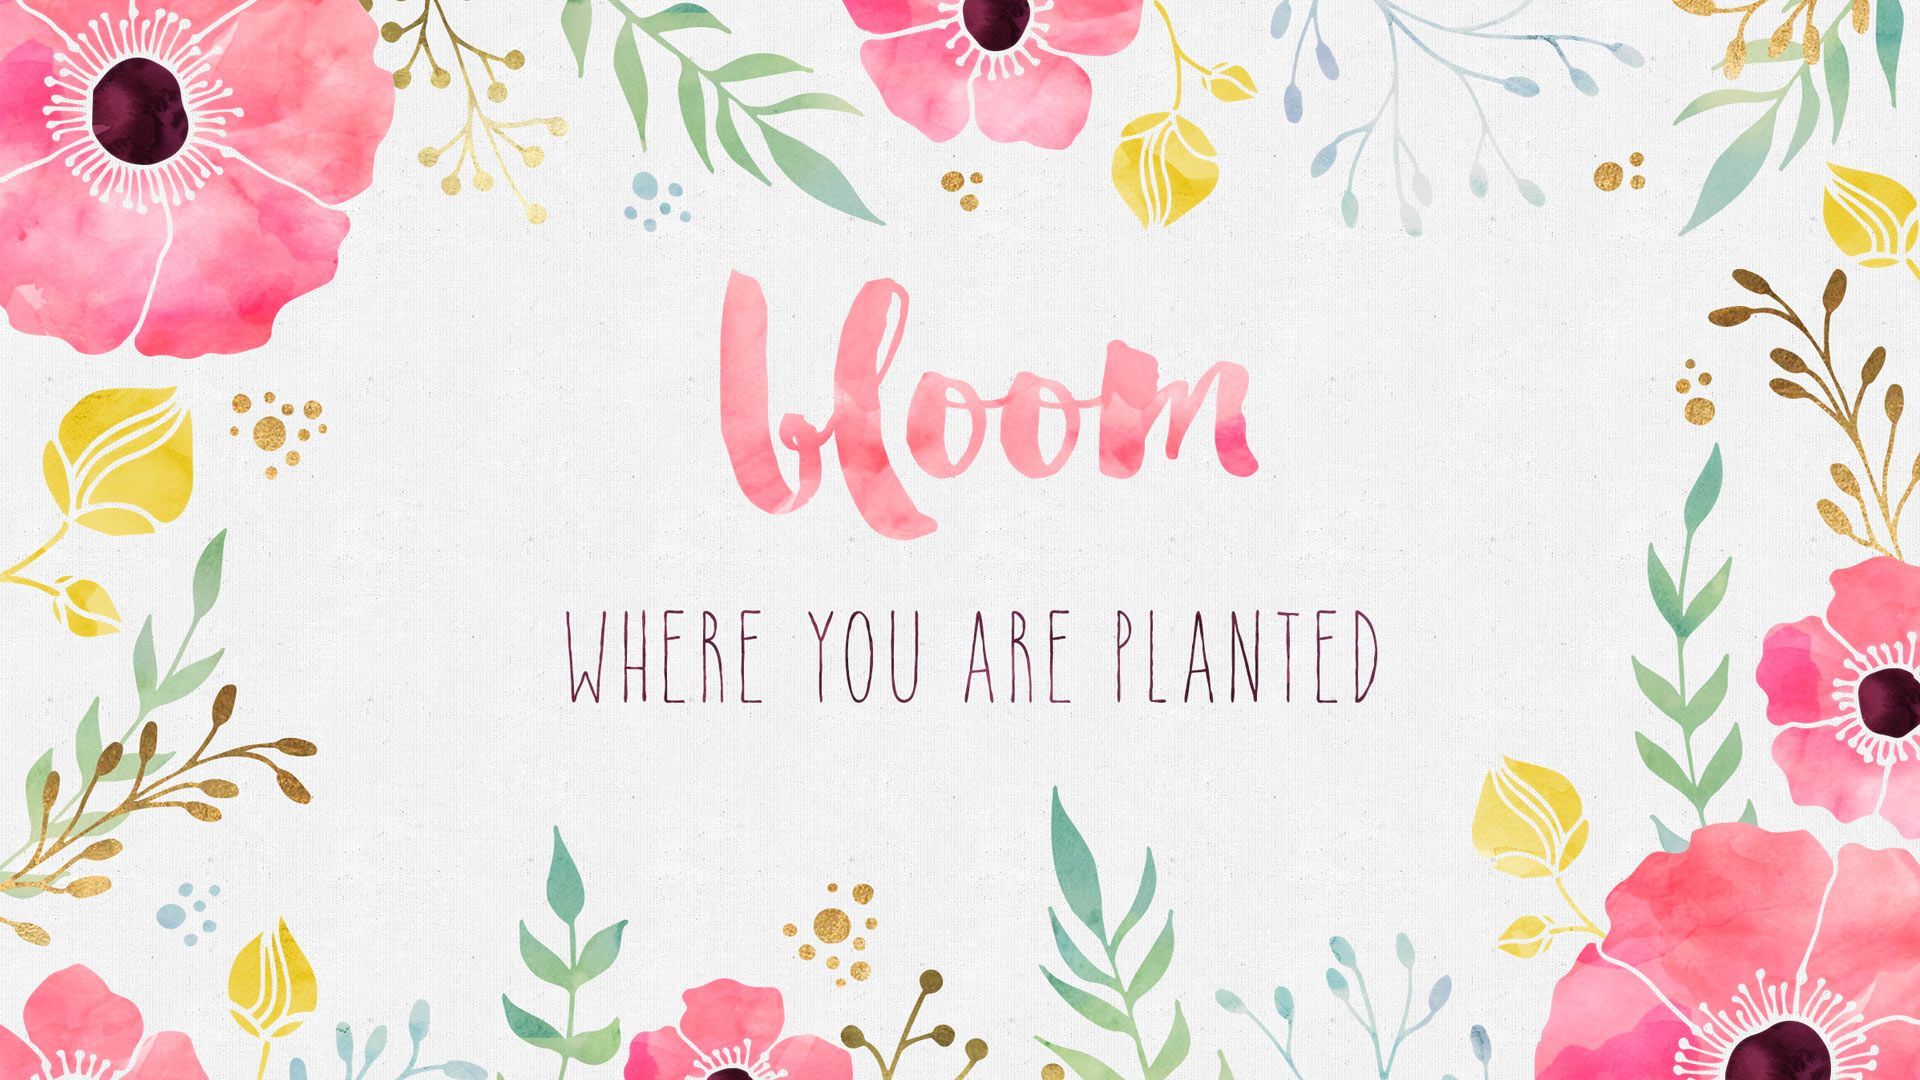 Free Desktop Wallpaper Where you are Planted. Hello spring wallpaper, Cute desktop wallpaper, Spring desktop wallpaper